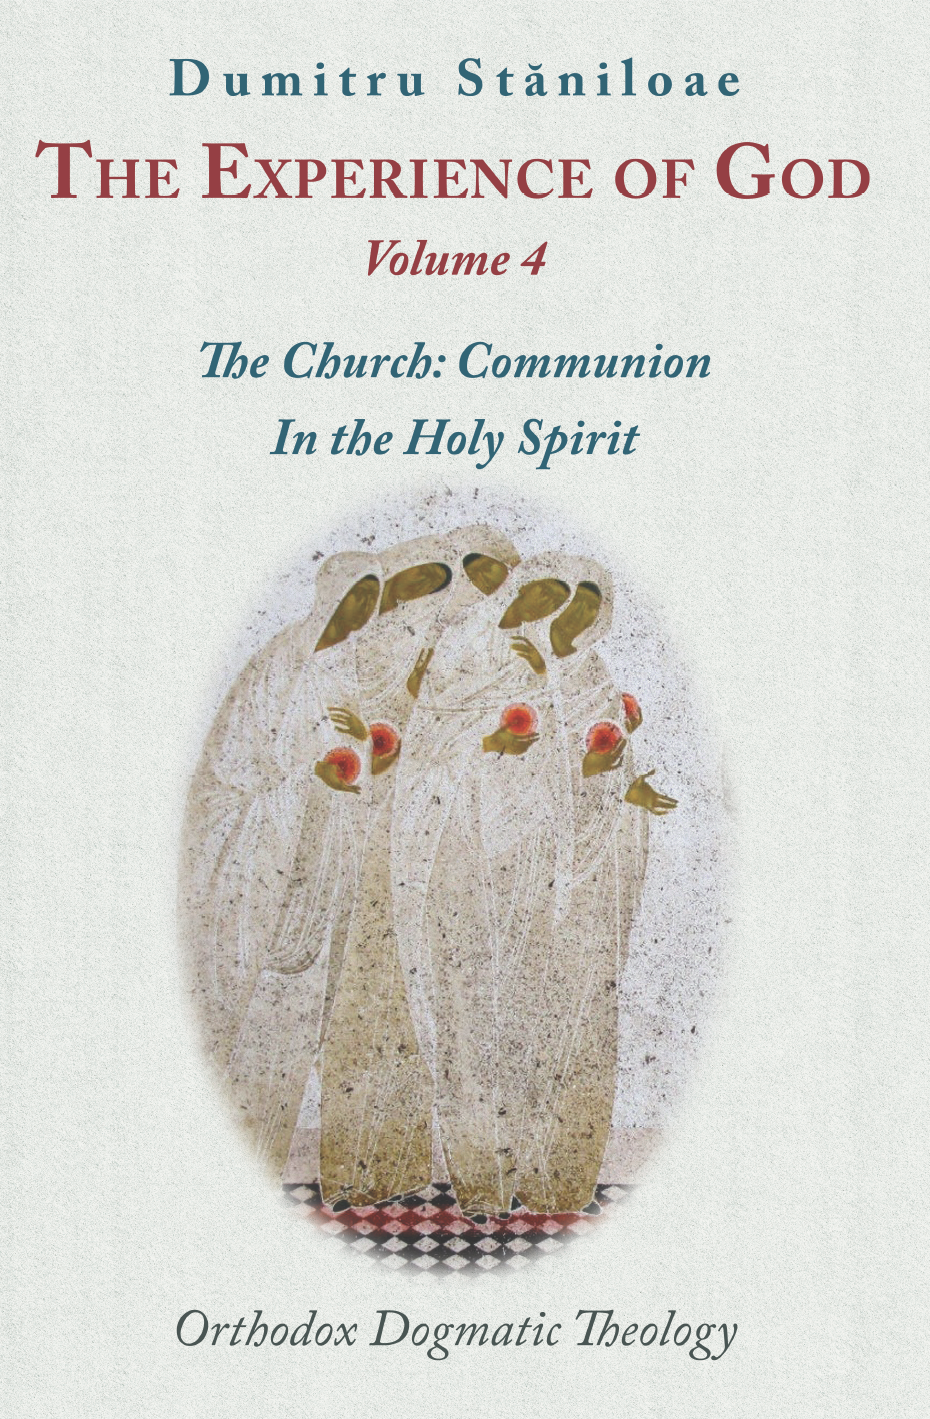 The Experience of God, Vol. 4: The Church: Communion in the Holy Spirit